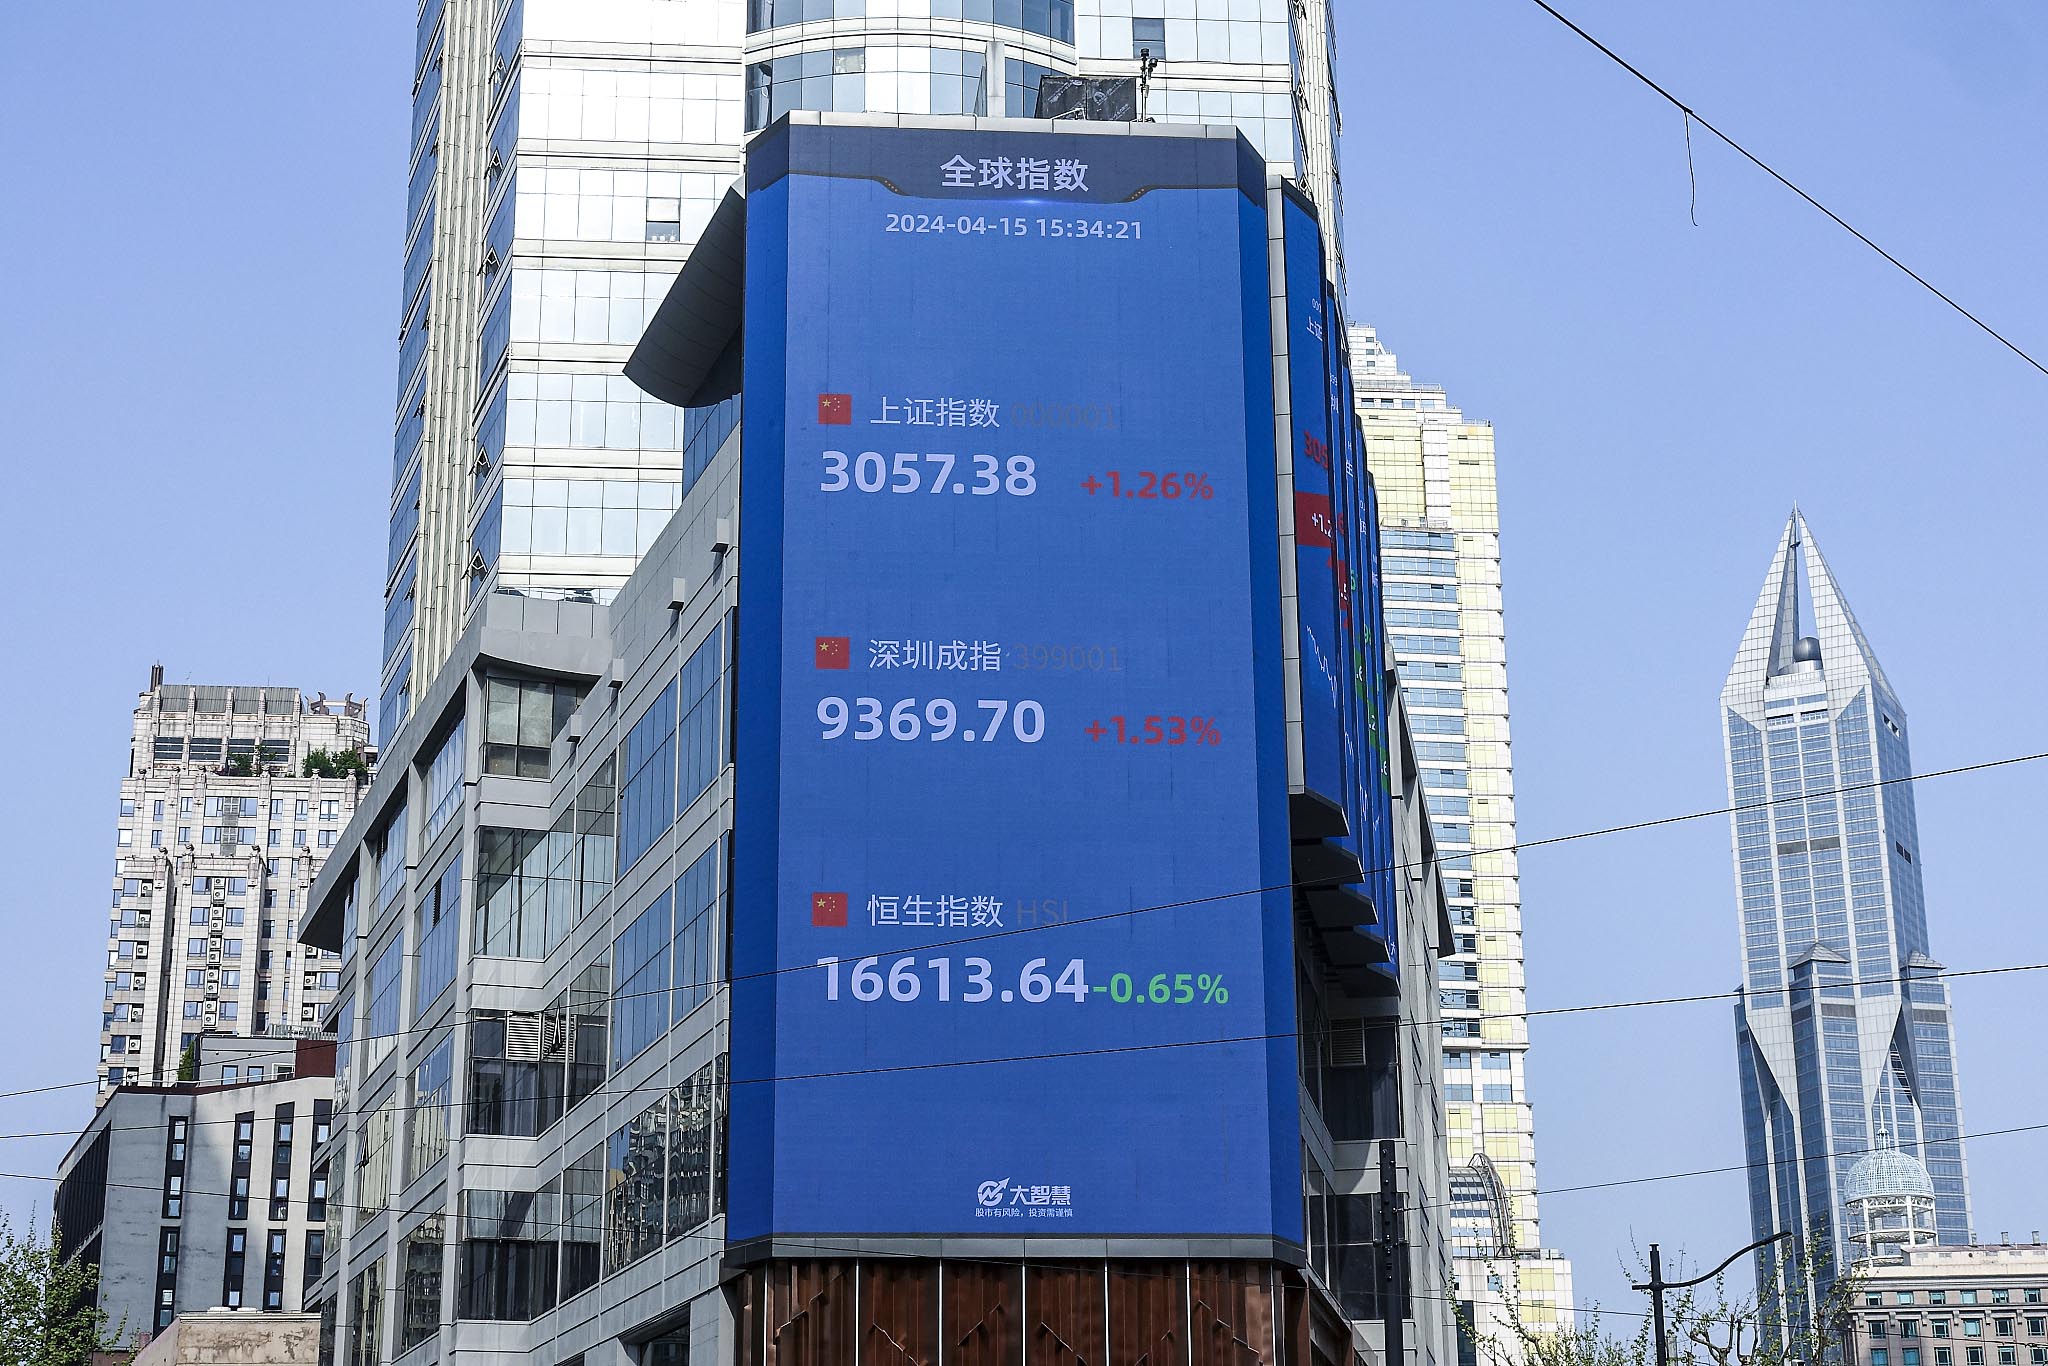 A board shows stock indices in Shanghai on April 15. Photo: VCG